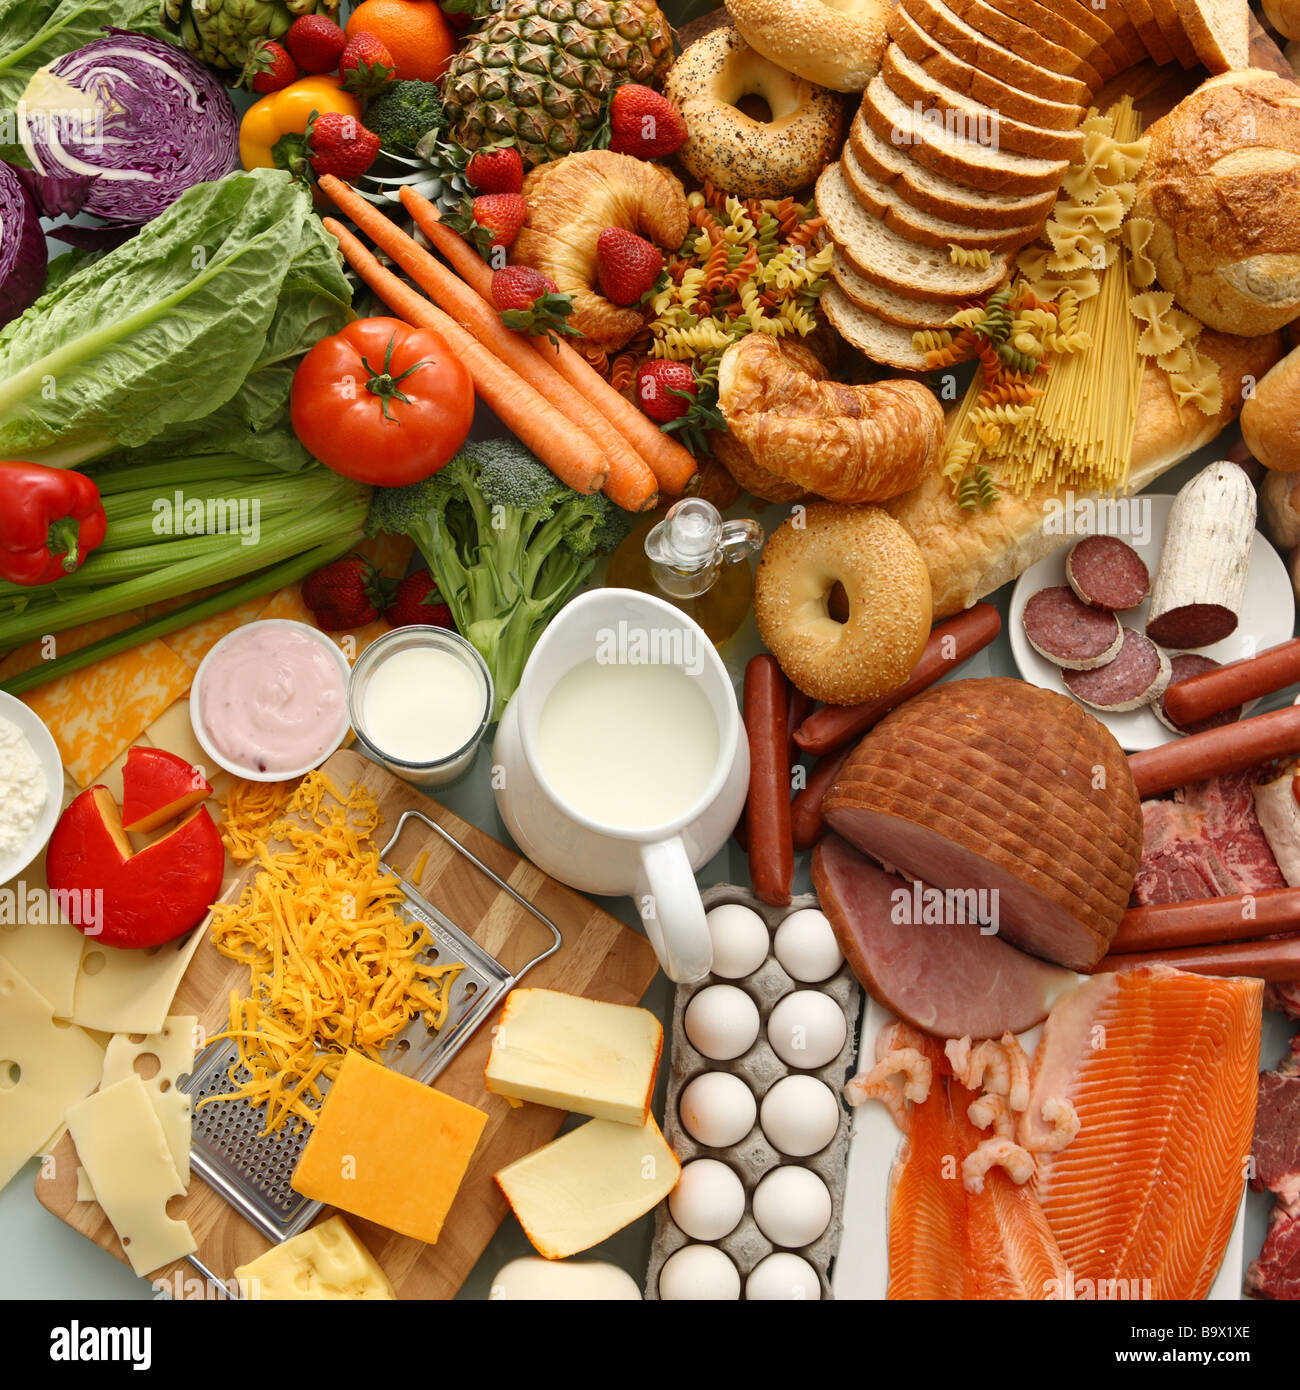 Large group of foods Stock Photo